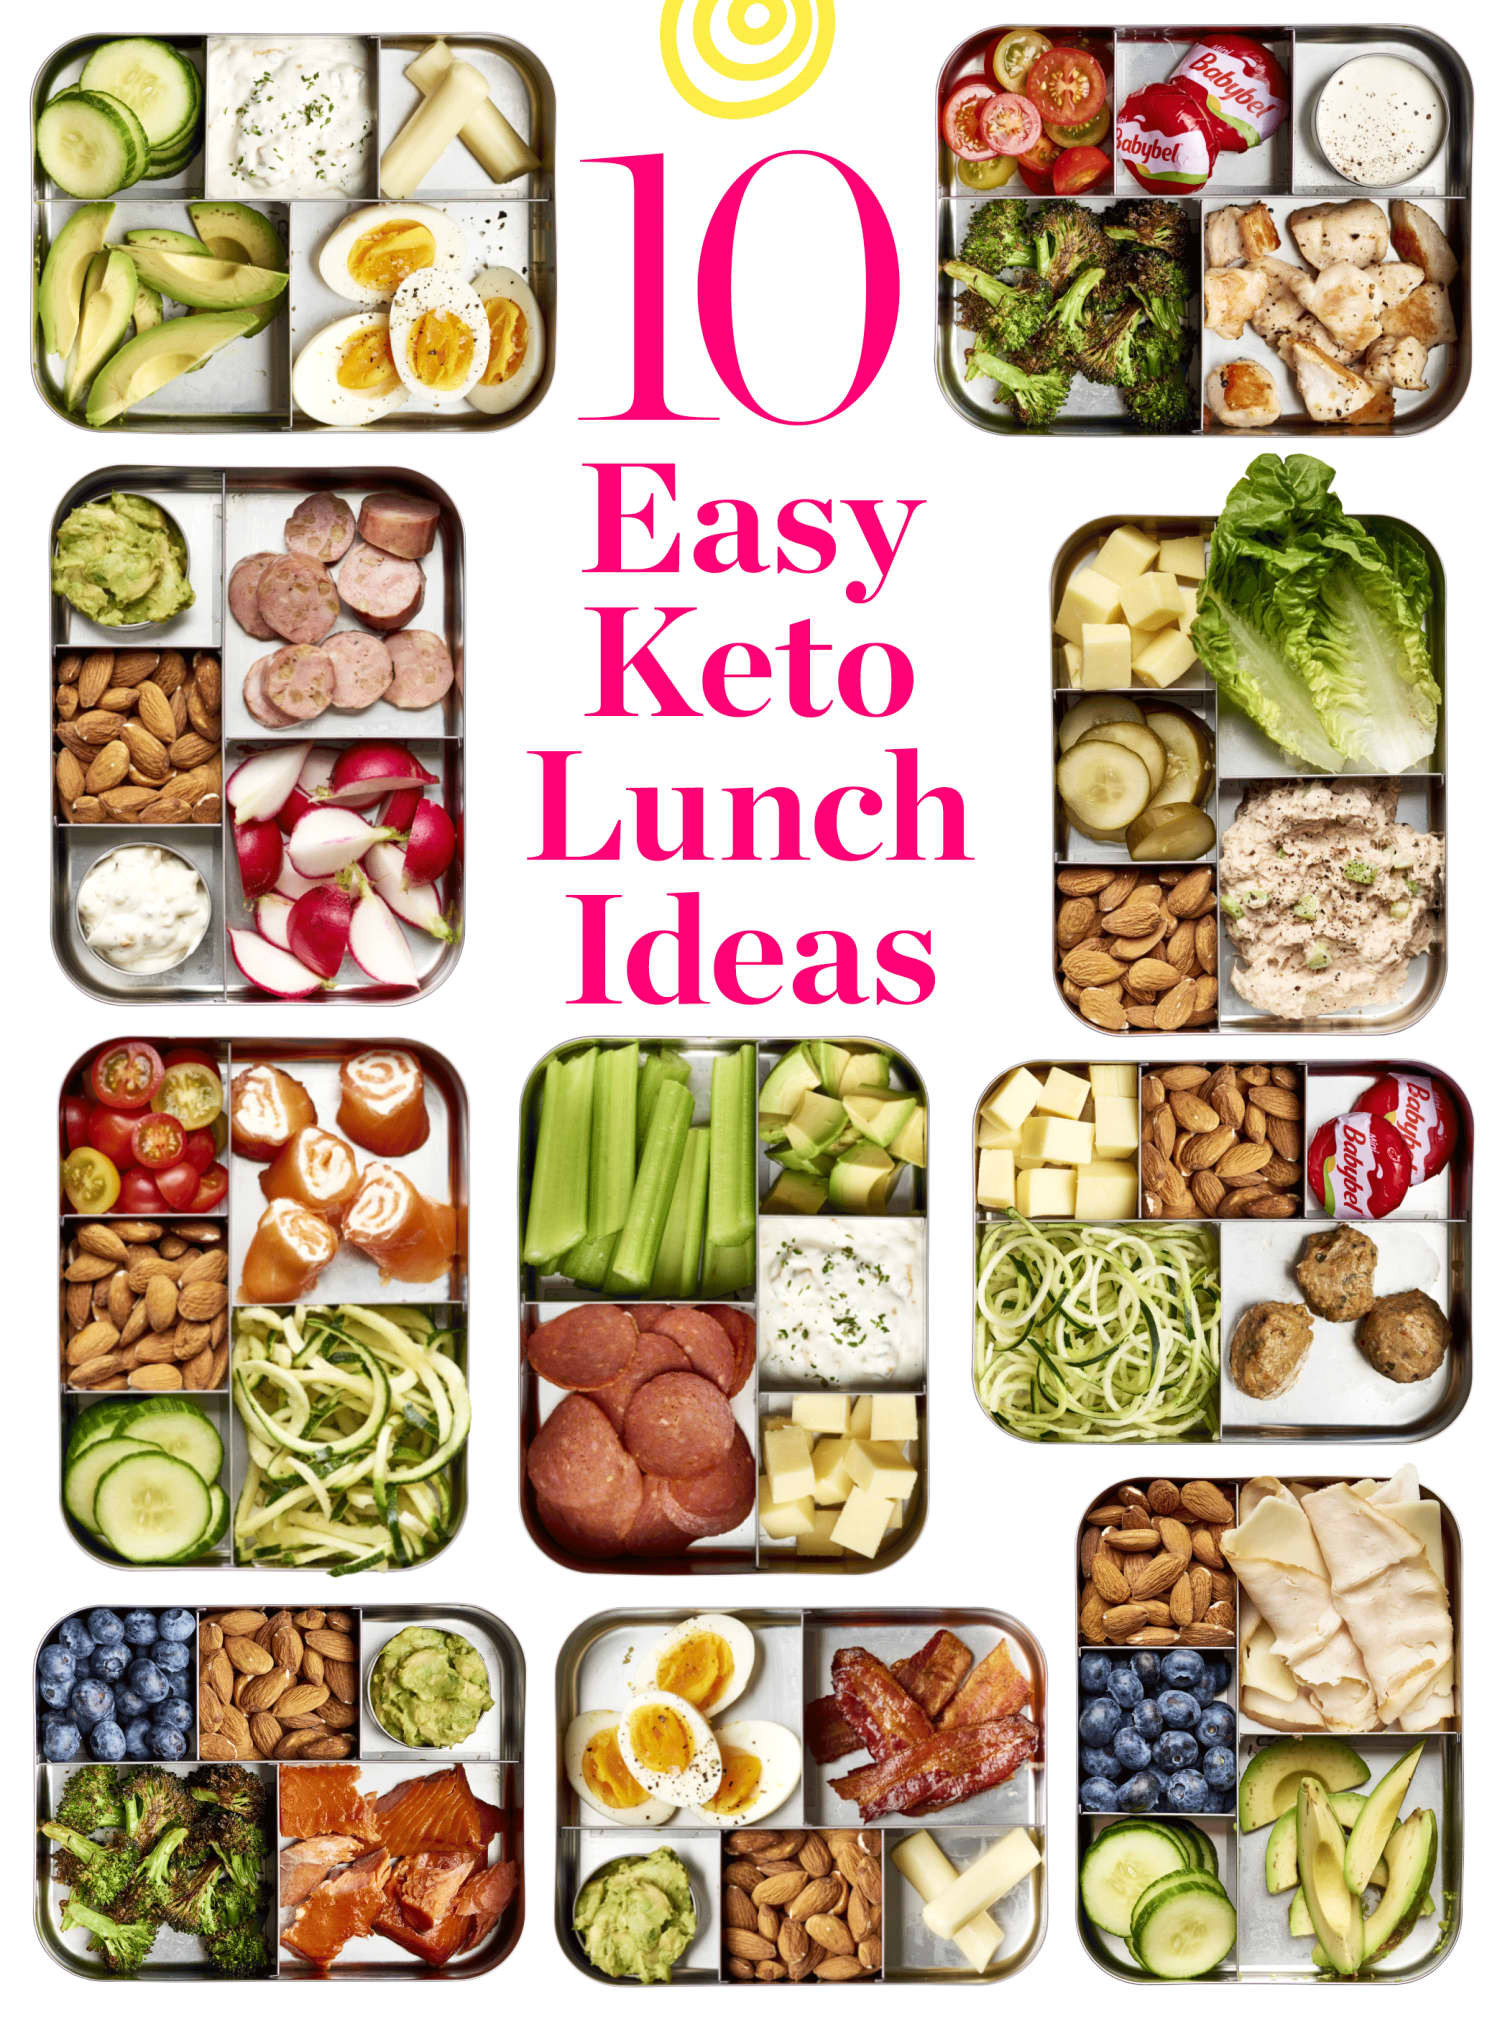 Low Carb Keto Lunch Ideas Easy
 10 Easy Keto Lunch Ideas with Net Carb Counts